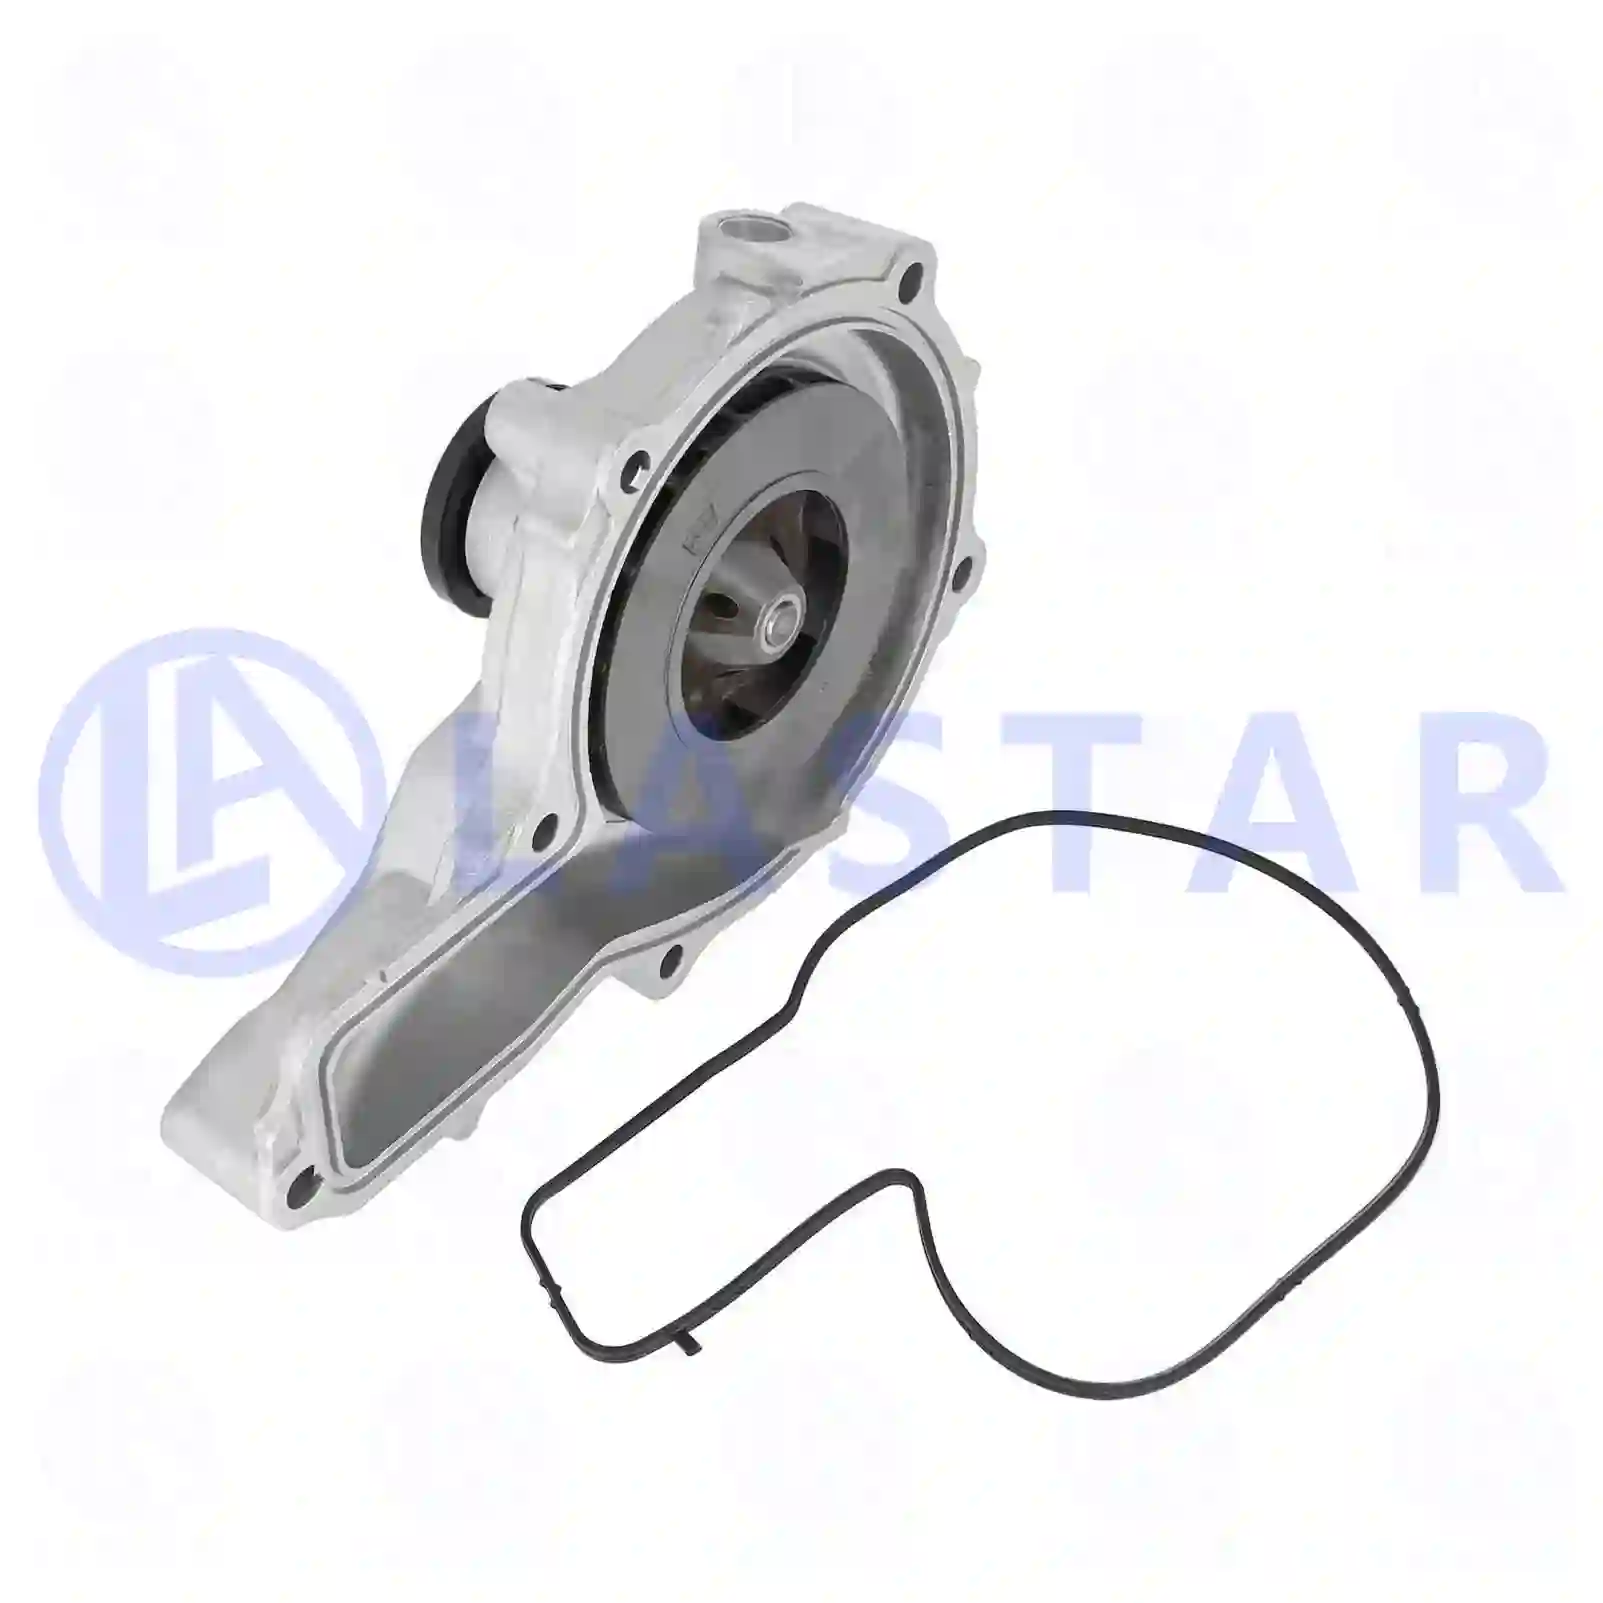 Water pump, without pulley, 77707128, 20744944, 21228795, 21468472, 22195450, 85003160, 85003709, 7420744939, 7420744940, 7421615952, 7422167707, 7422197707, 7485000763, 7485013068, 20451516, 20464403, 20538820, 20538845, 20744939, 20744940, 21221878, 21228793, 21468471, 21615952, 2201101, 22195450, 22197705, 22902431, 3161436, 3801102, 3801418, 3801484, 3803844, 3803930, 85000062, 85000347, 85000486, 85003125, 85003708, 85006062, 85020085, 85021450, ZG00771-0008 ||  77707128 Lastar Spare Part | Truck Spare Parts, Auotomotive Spare Parts Water pump, without pulley, 77707128, 20744944, 21228795, 21468472, 22195450, 85003160, 85003709, 7420744939, 7420744940, 7421615952, 7422167707, 7422197707, 7485000763, 7485013068, 20451516, 20464403, 20538820, 20538845, 20744939, 20744940, 21221878, 21228793, 21468471, 21615952, 2201101, 22195450, 22197705, 22902431, 3161436, 3801102, 3801418, 3801484, 3803844, 3803930, 85000062, 85000347, 85000486, 85003125, 85003708, 85006062, 85020085, 85021450, ZG00771-0008 ||  77707128 Lastar Spare Part | Truck Spare Parts, Auotomotive Spare Parts